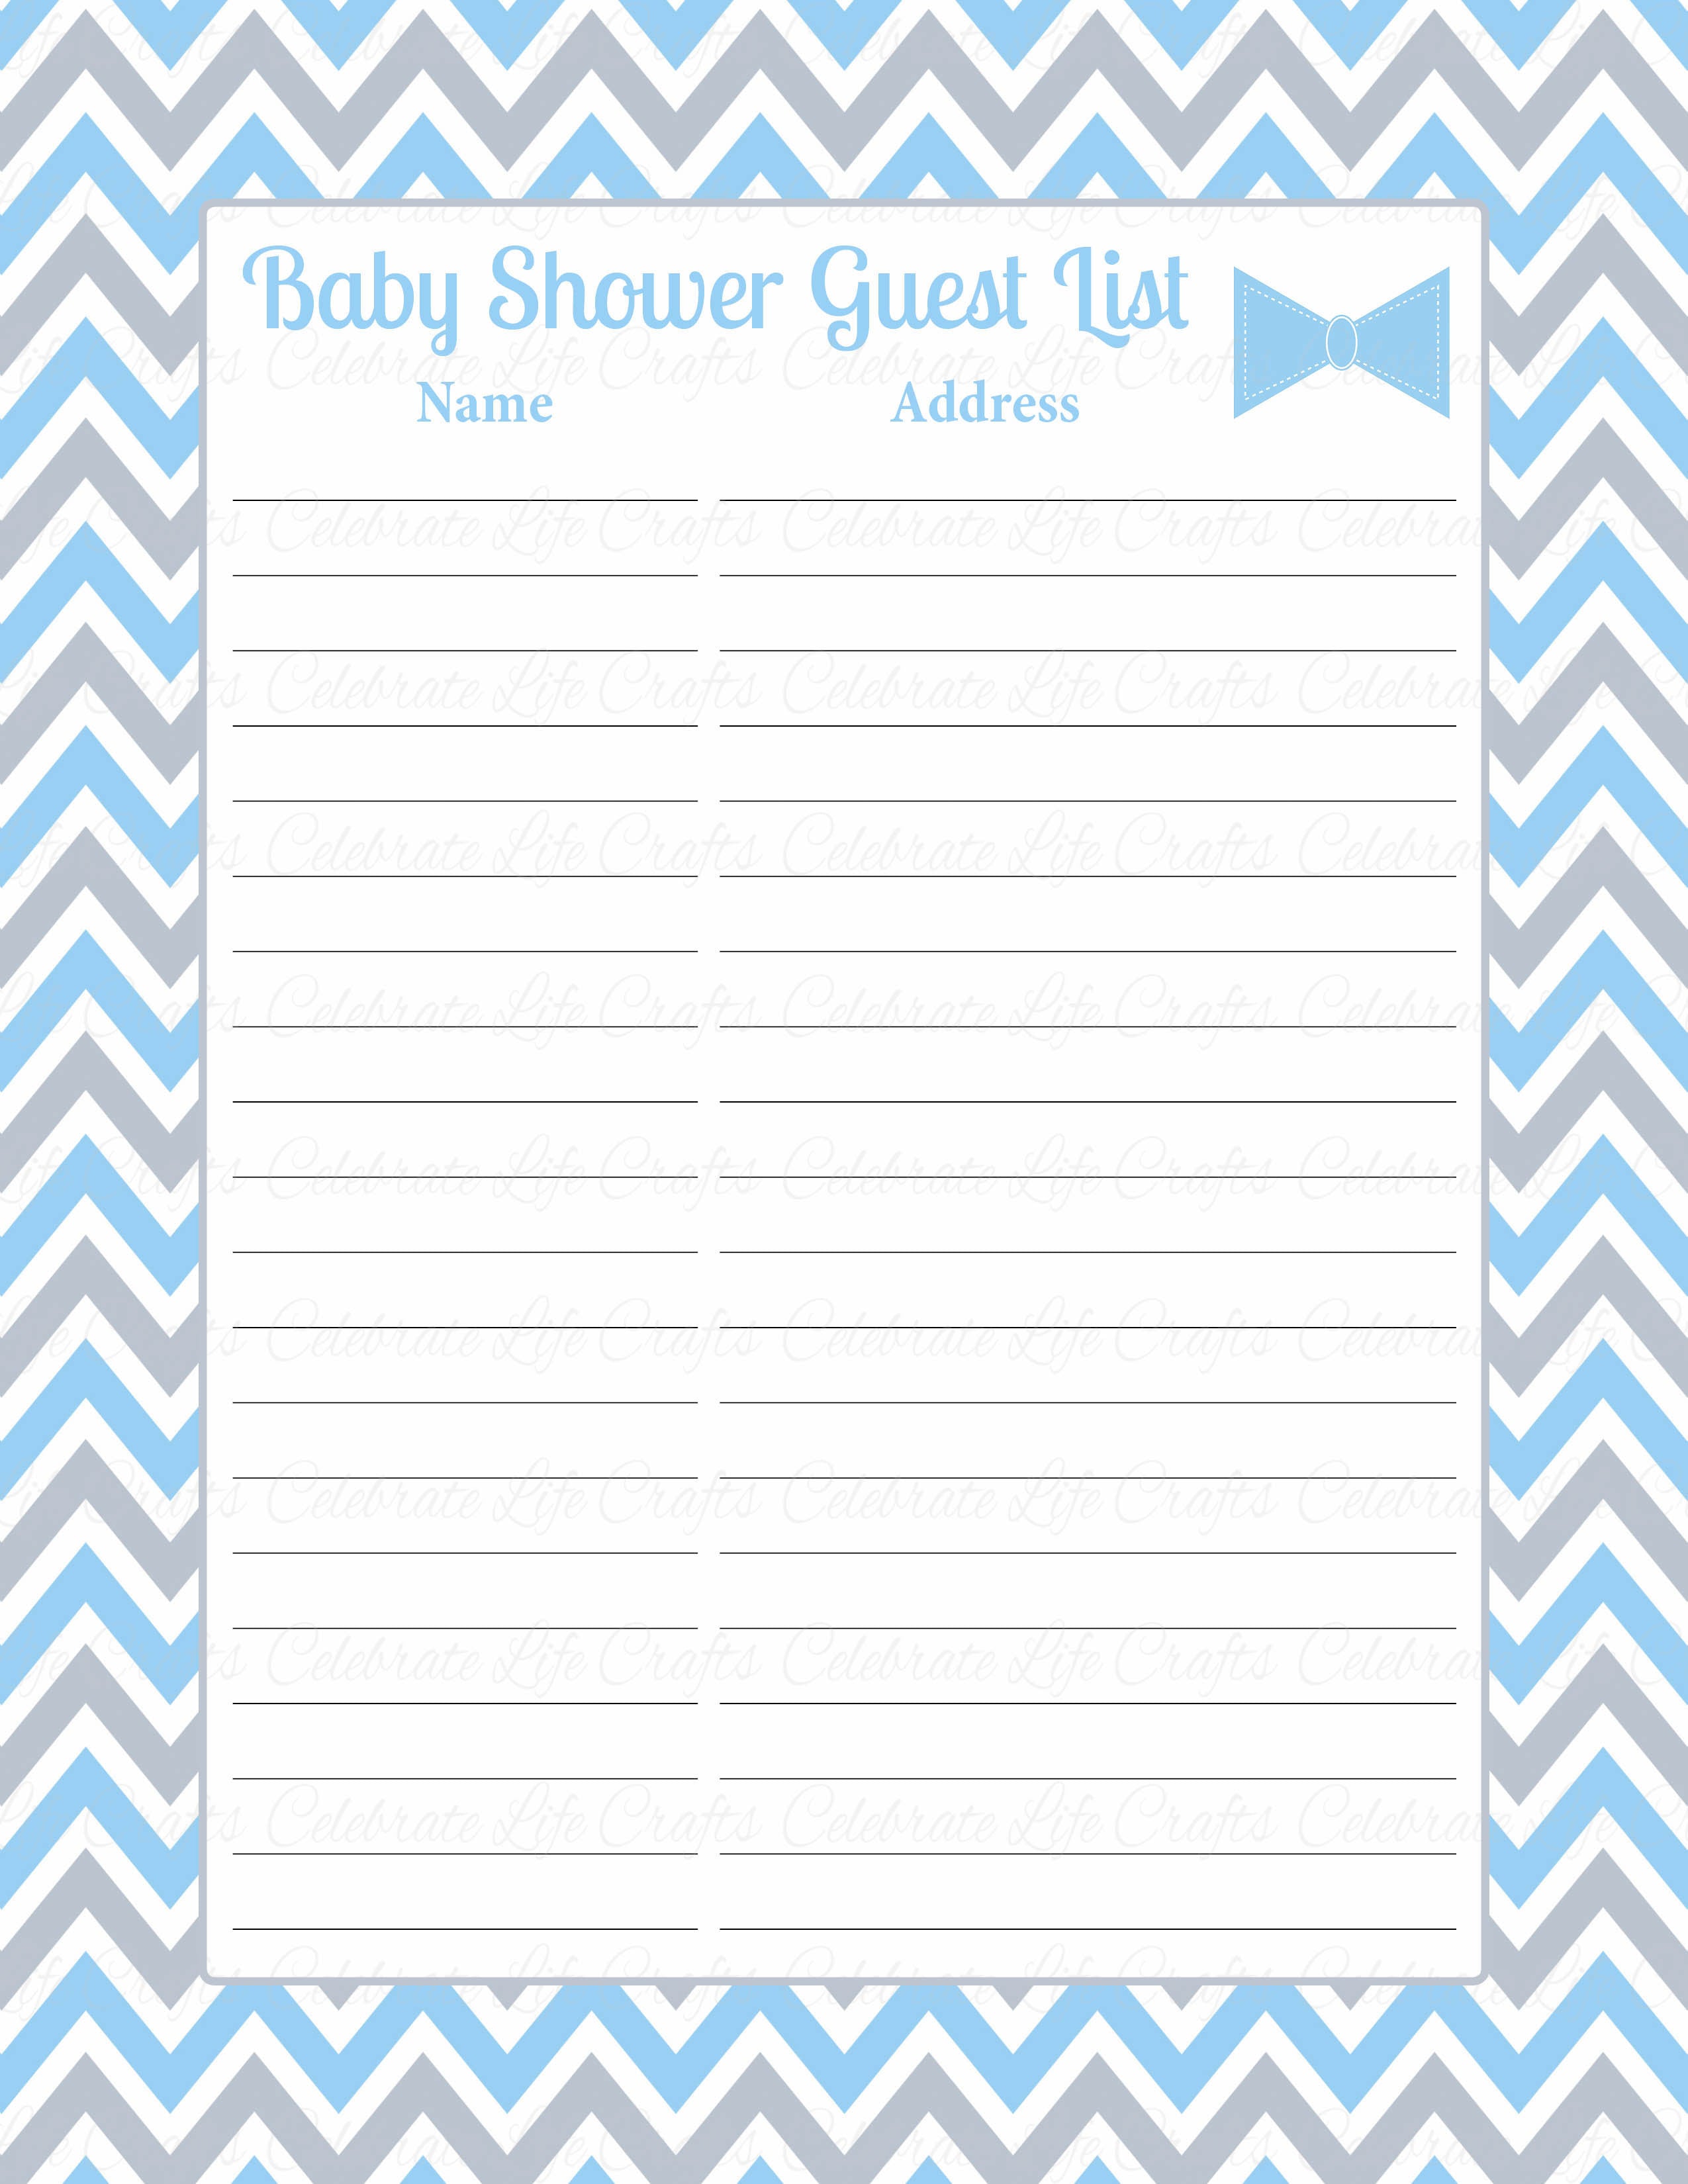 Sign The Guest Book For Baby Shower Printable